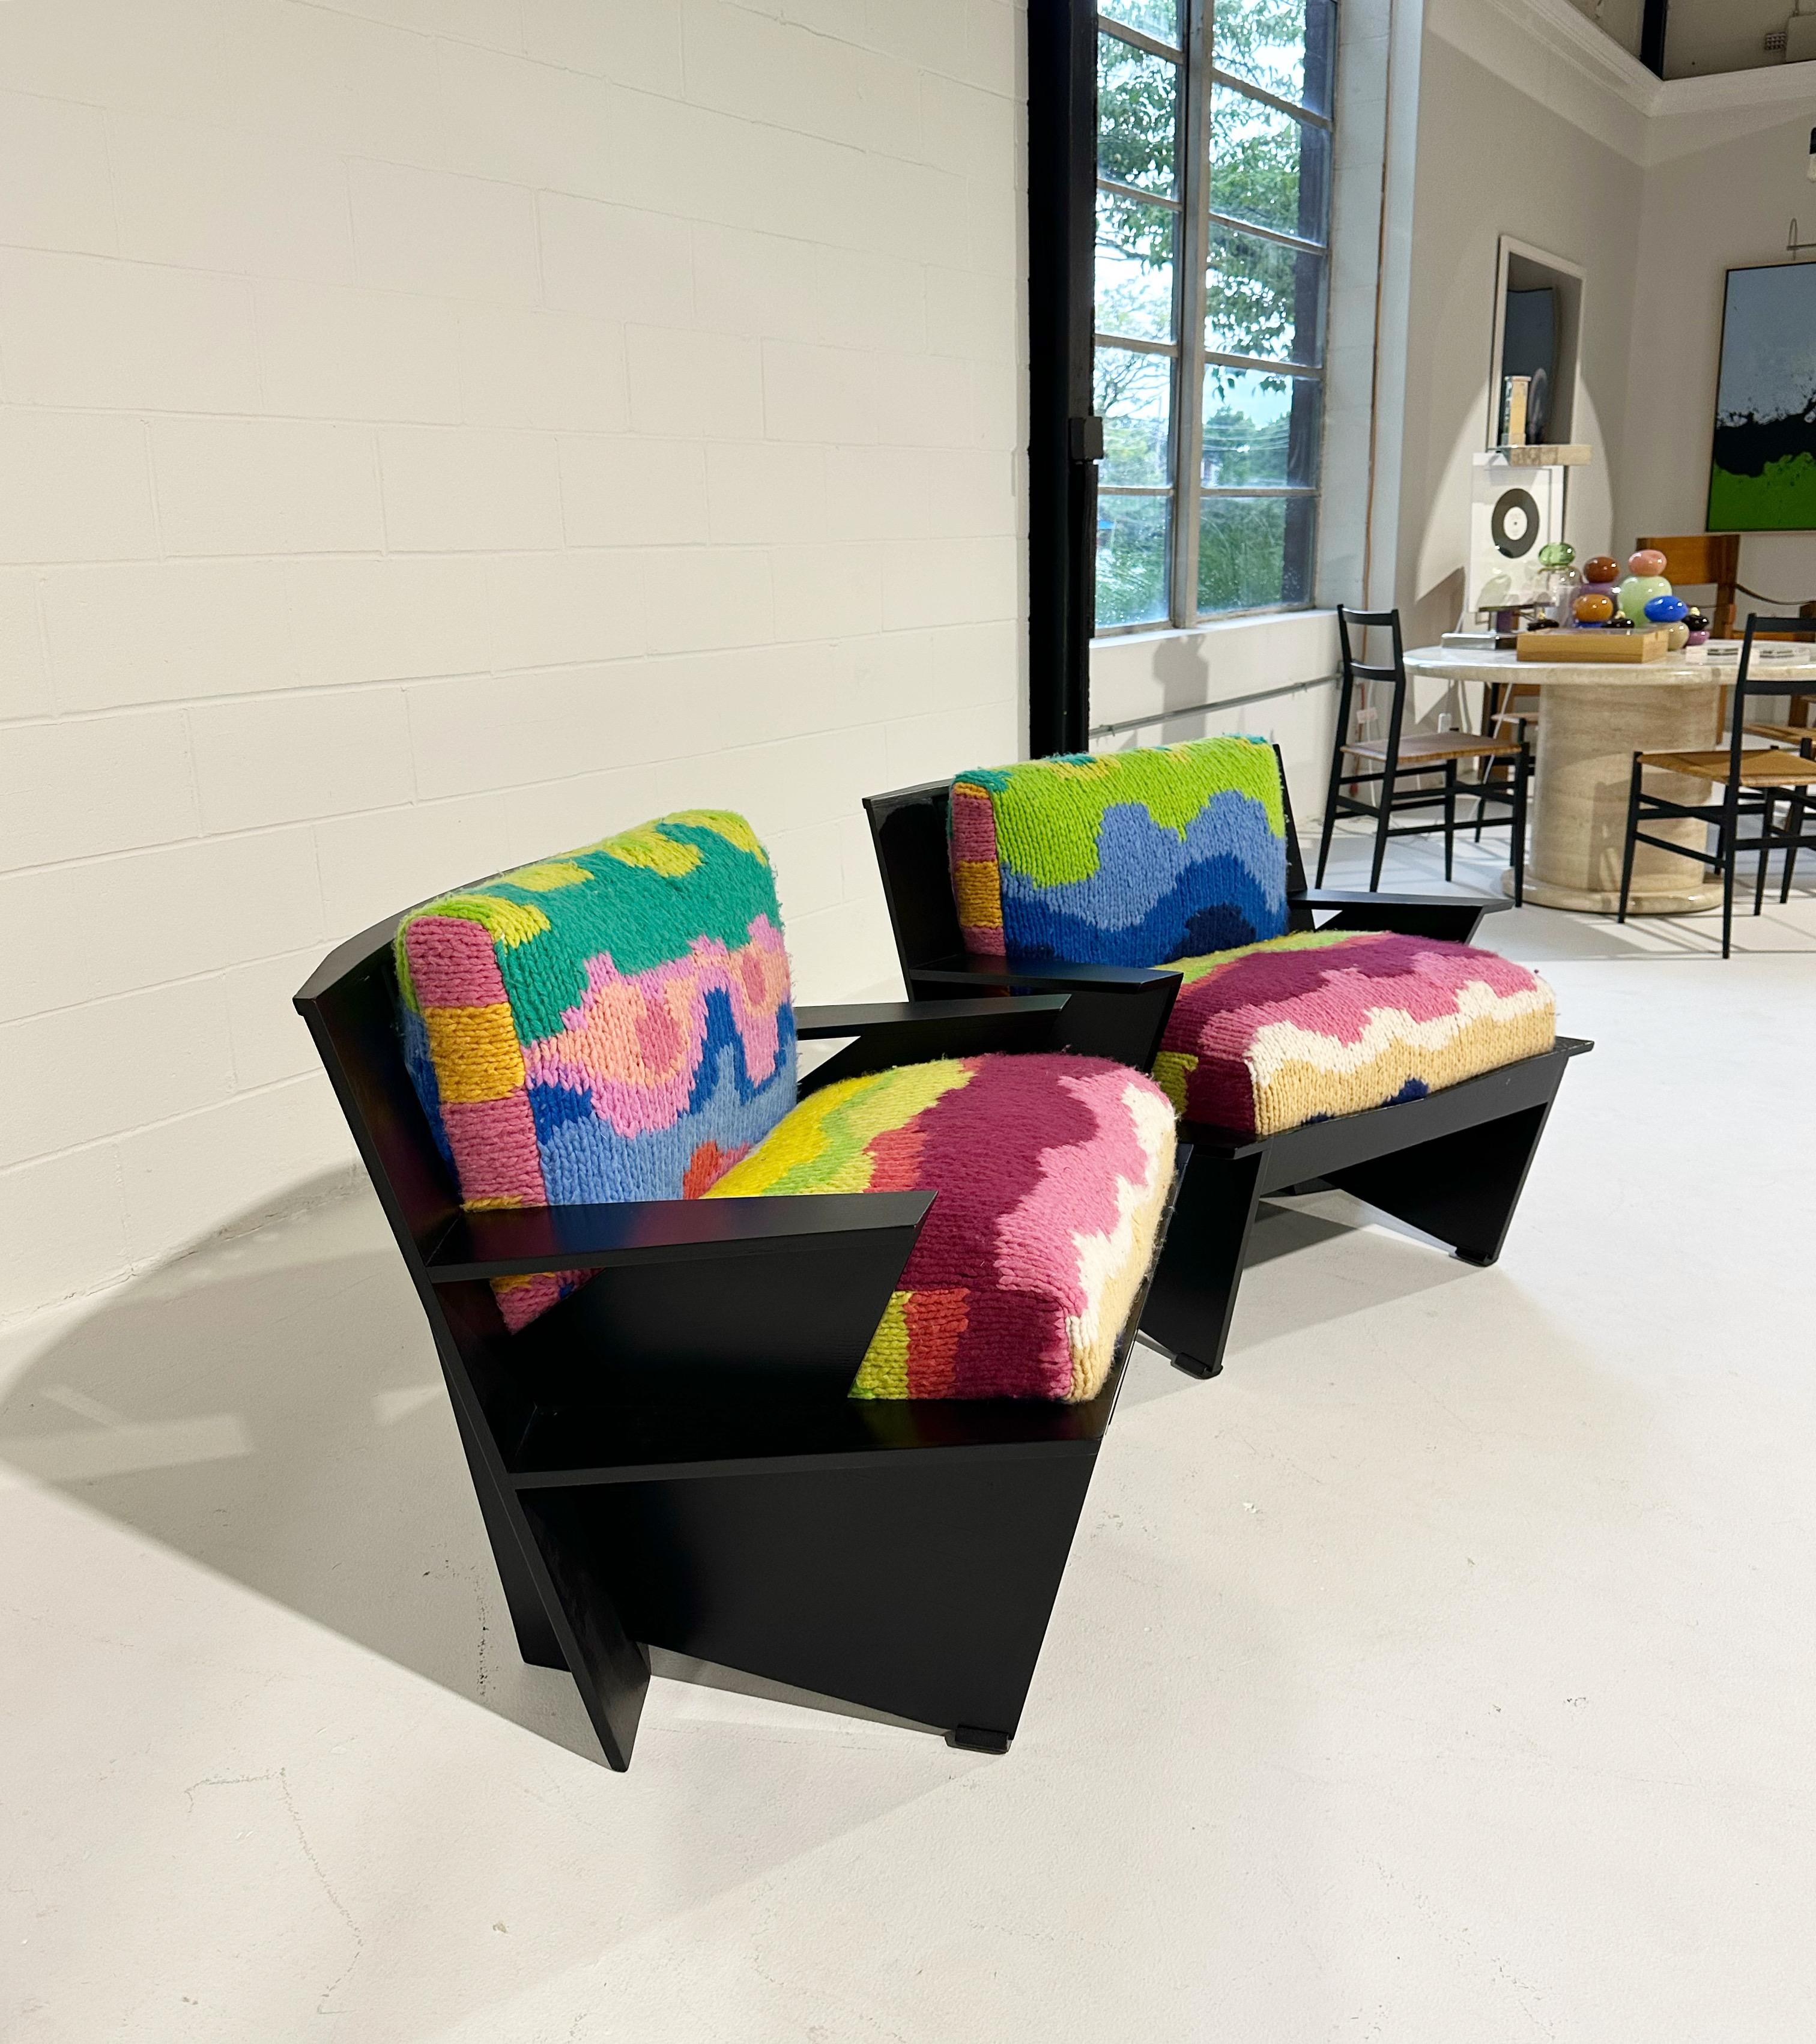 We love these lacquered plywood chairs from the designdom of 1980s Italy. For the new custom cushions, we chose colorful, handwoven cashmere throws from Gabriela Hearst. The Gabriela Hearst Levy blanket has a colorful intarsia motif that is directly